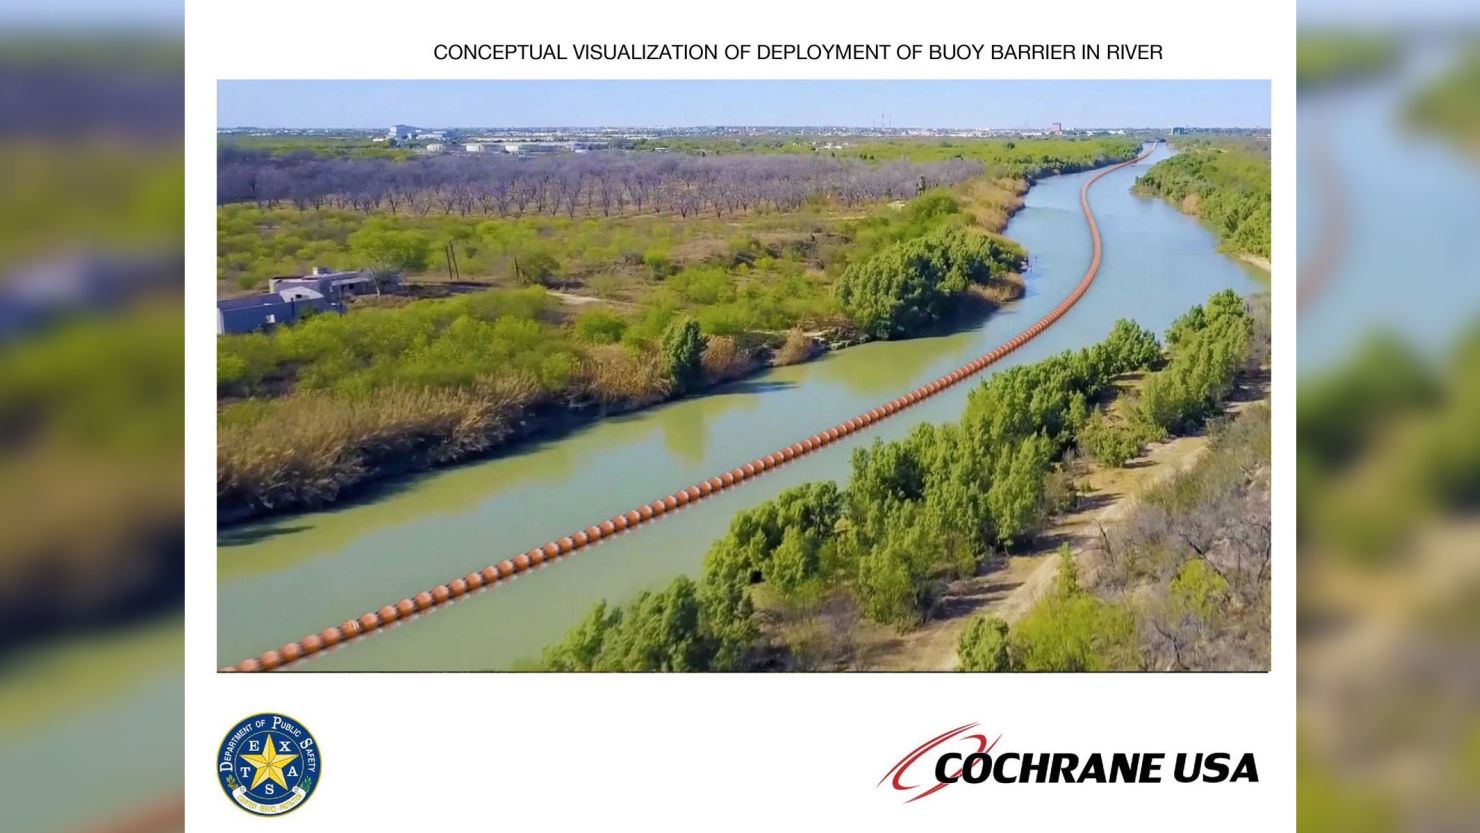 A conceptual visualization of the planned floating marine barrier along the Rio Grande.